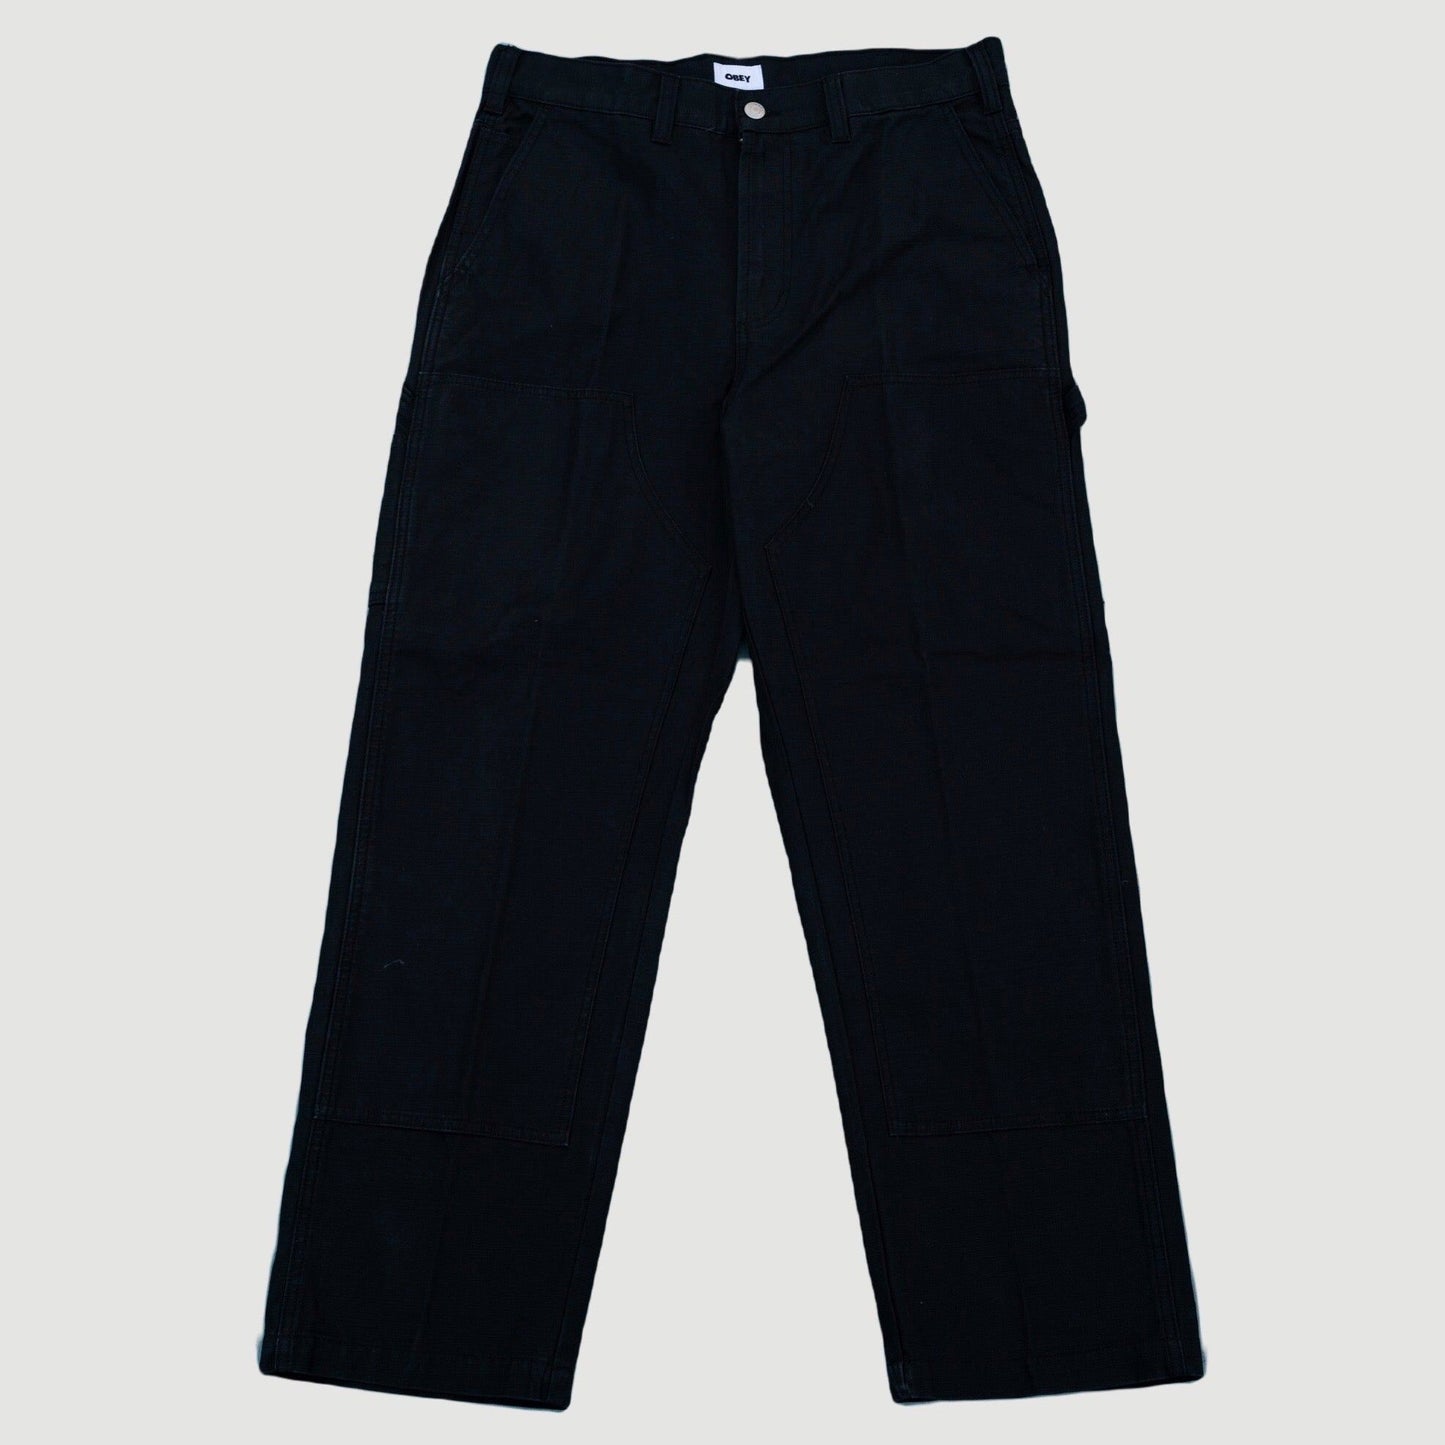 Obey Big Timer Twill Double Knee Pants Black